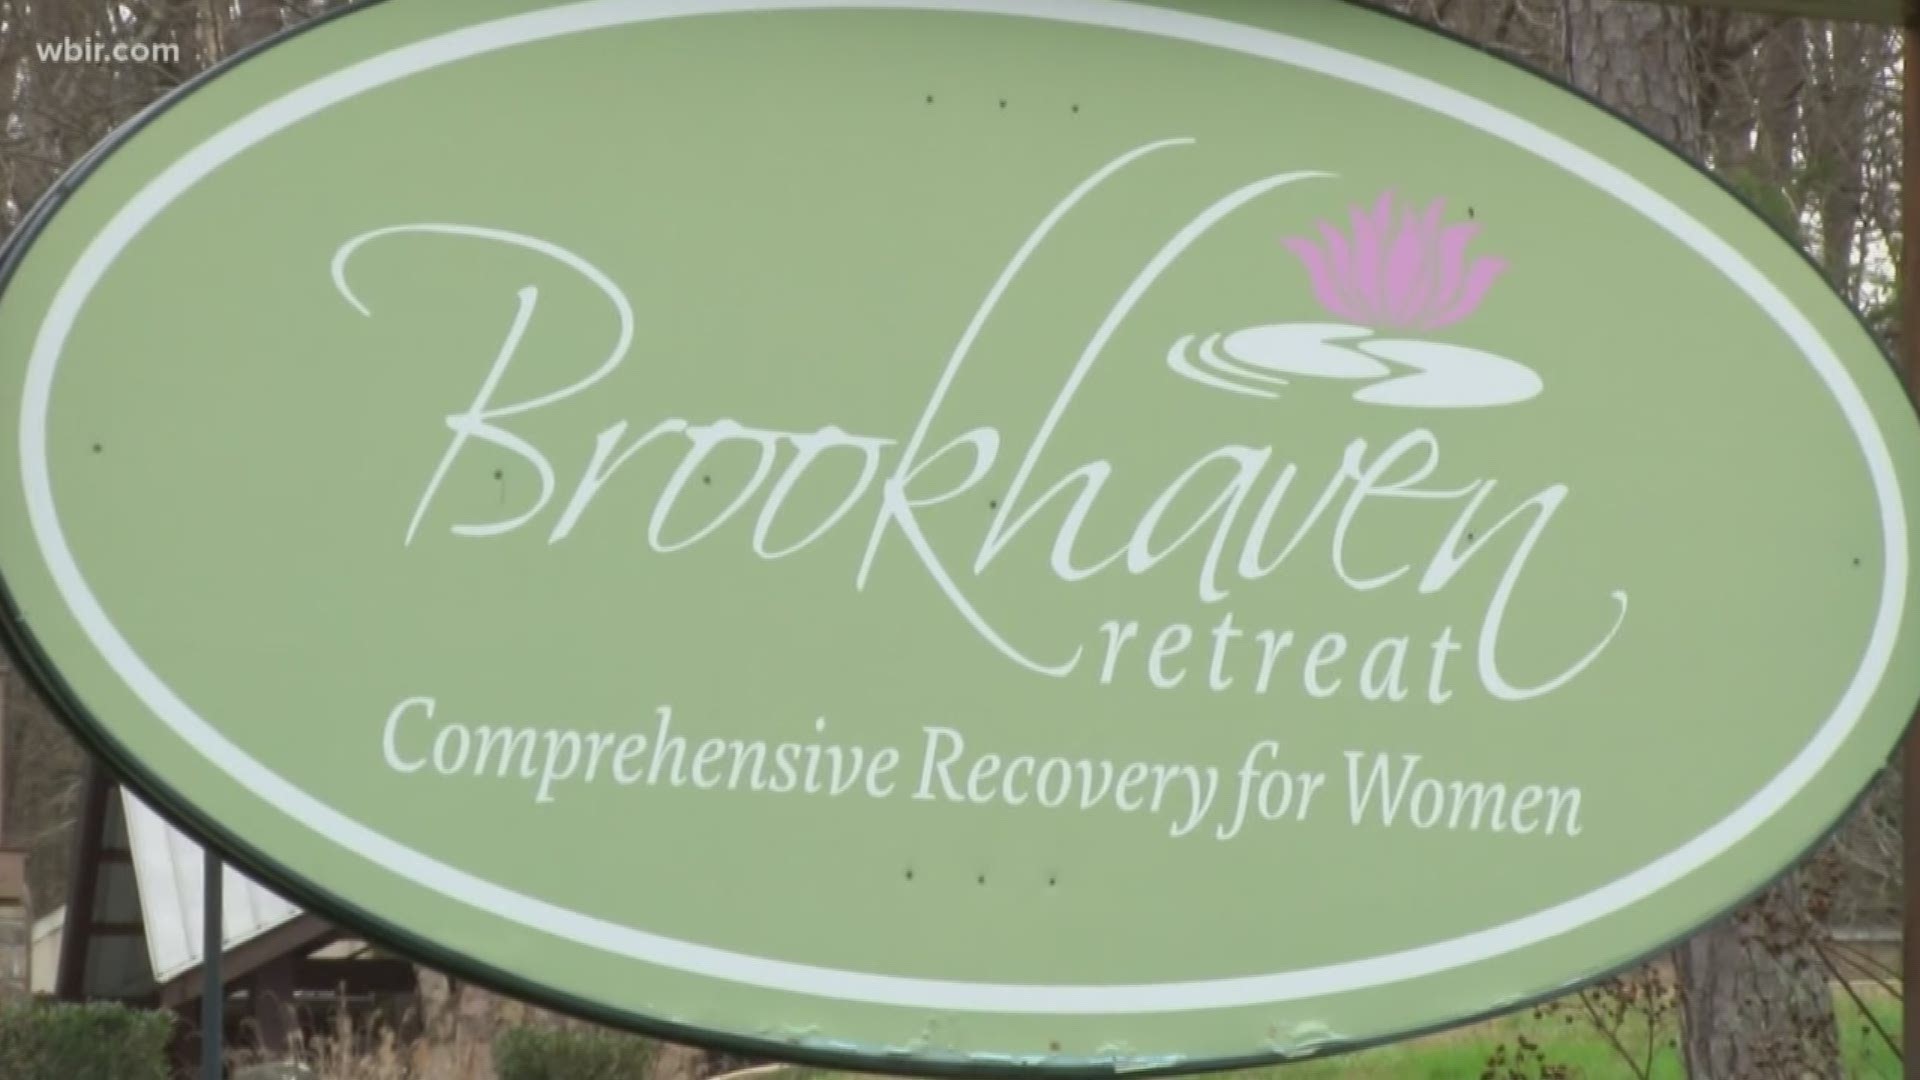 A lawyer who successfully sued a private treatment center for women says she's not surprised it abruptly closed.